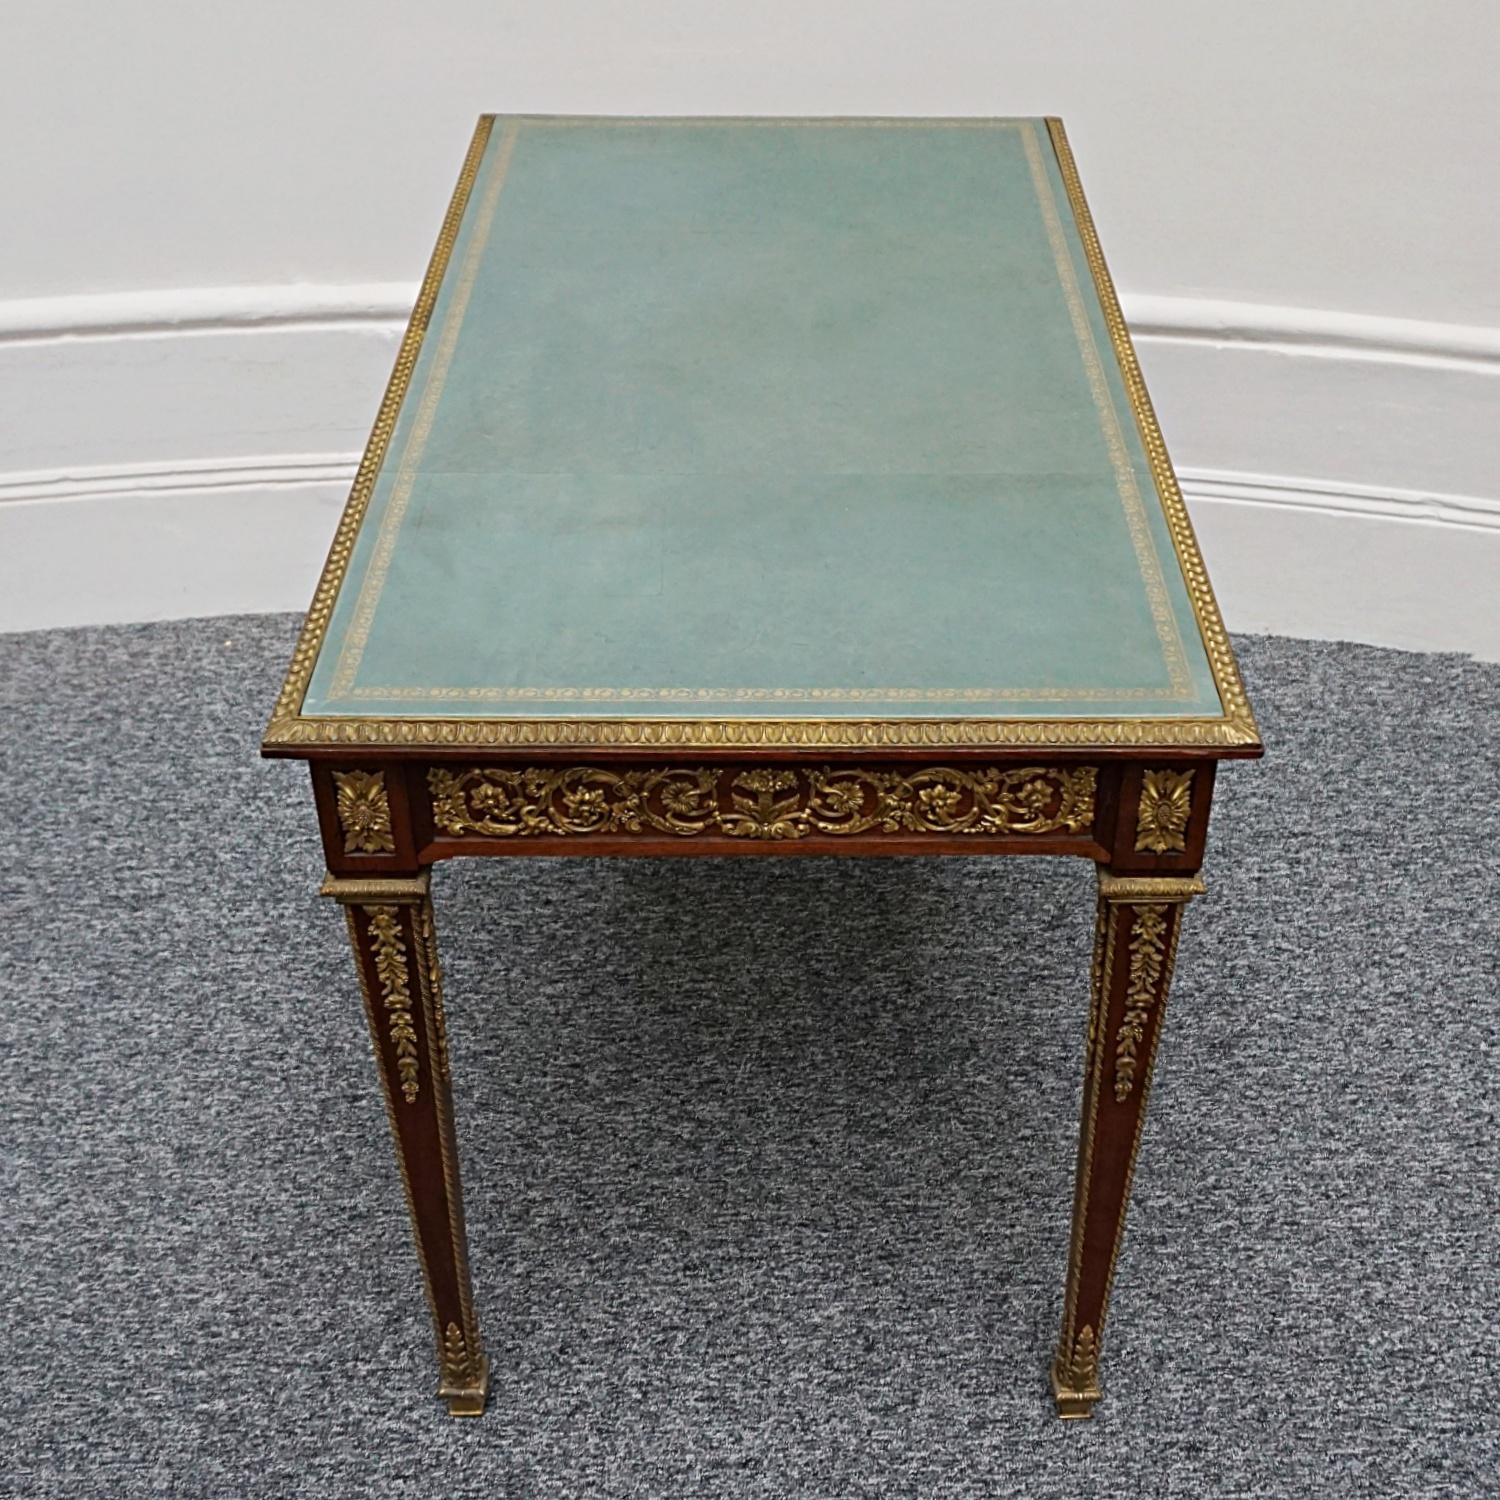 Louis XVI Style Gilt-Bronze Mounted Kingwood Writing Table by Francois Linke For Sale 12